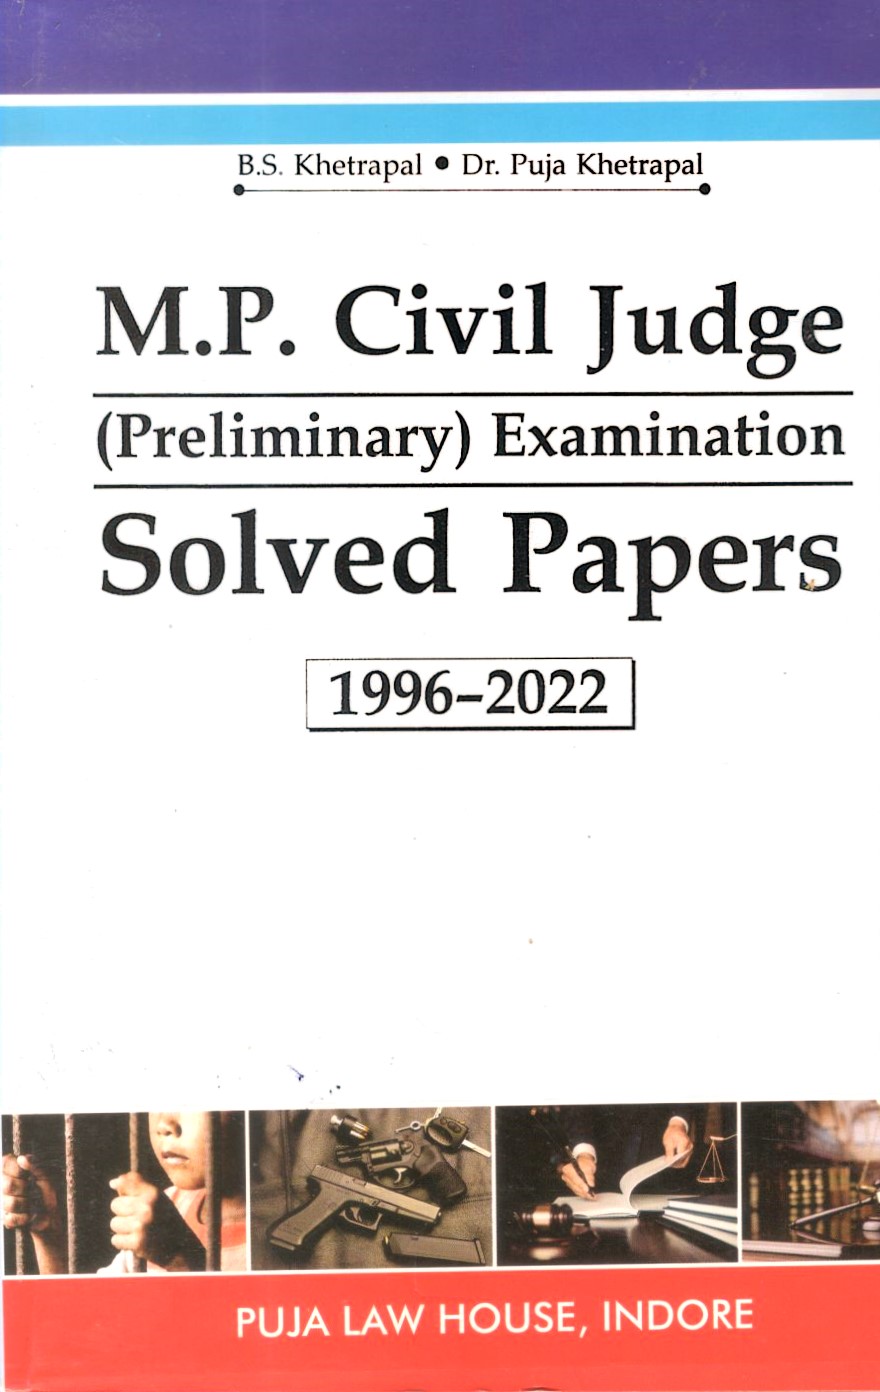 M.P. Civil Judge (Preliminary) Examination Solved Papers 1996-2022